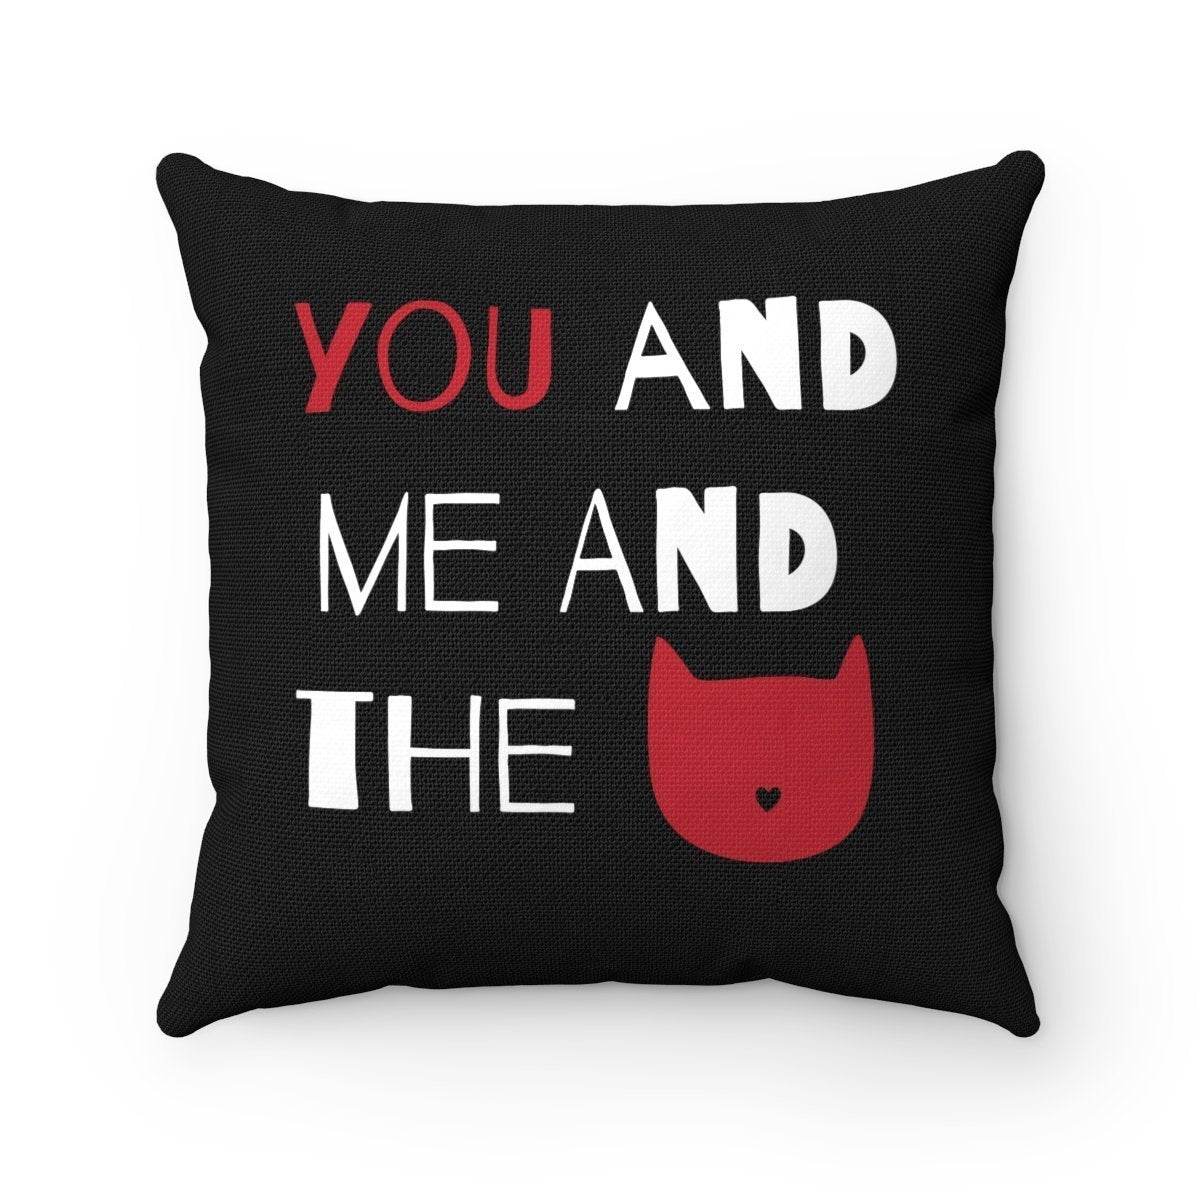 Cat Decorations for Home, Cute Cat Pillows, Cat Throw Pillow With the Text You and Me and the Cat Printed Across the Front